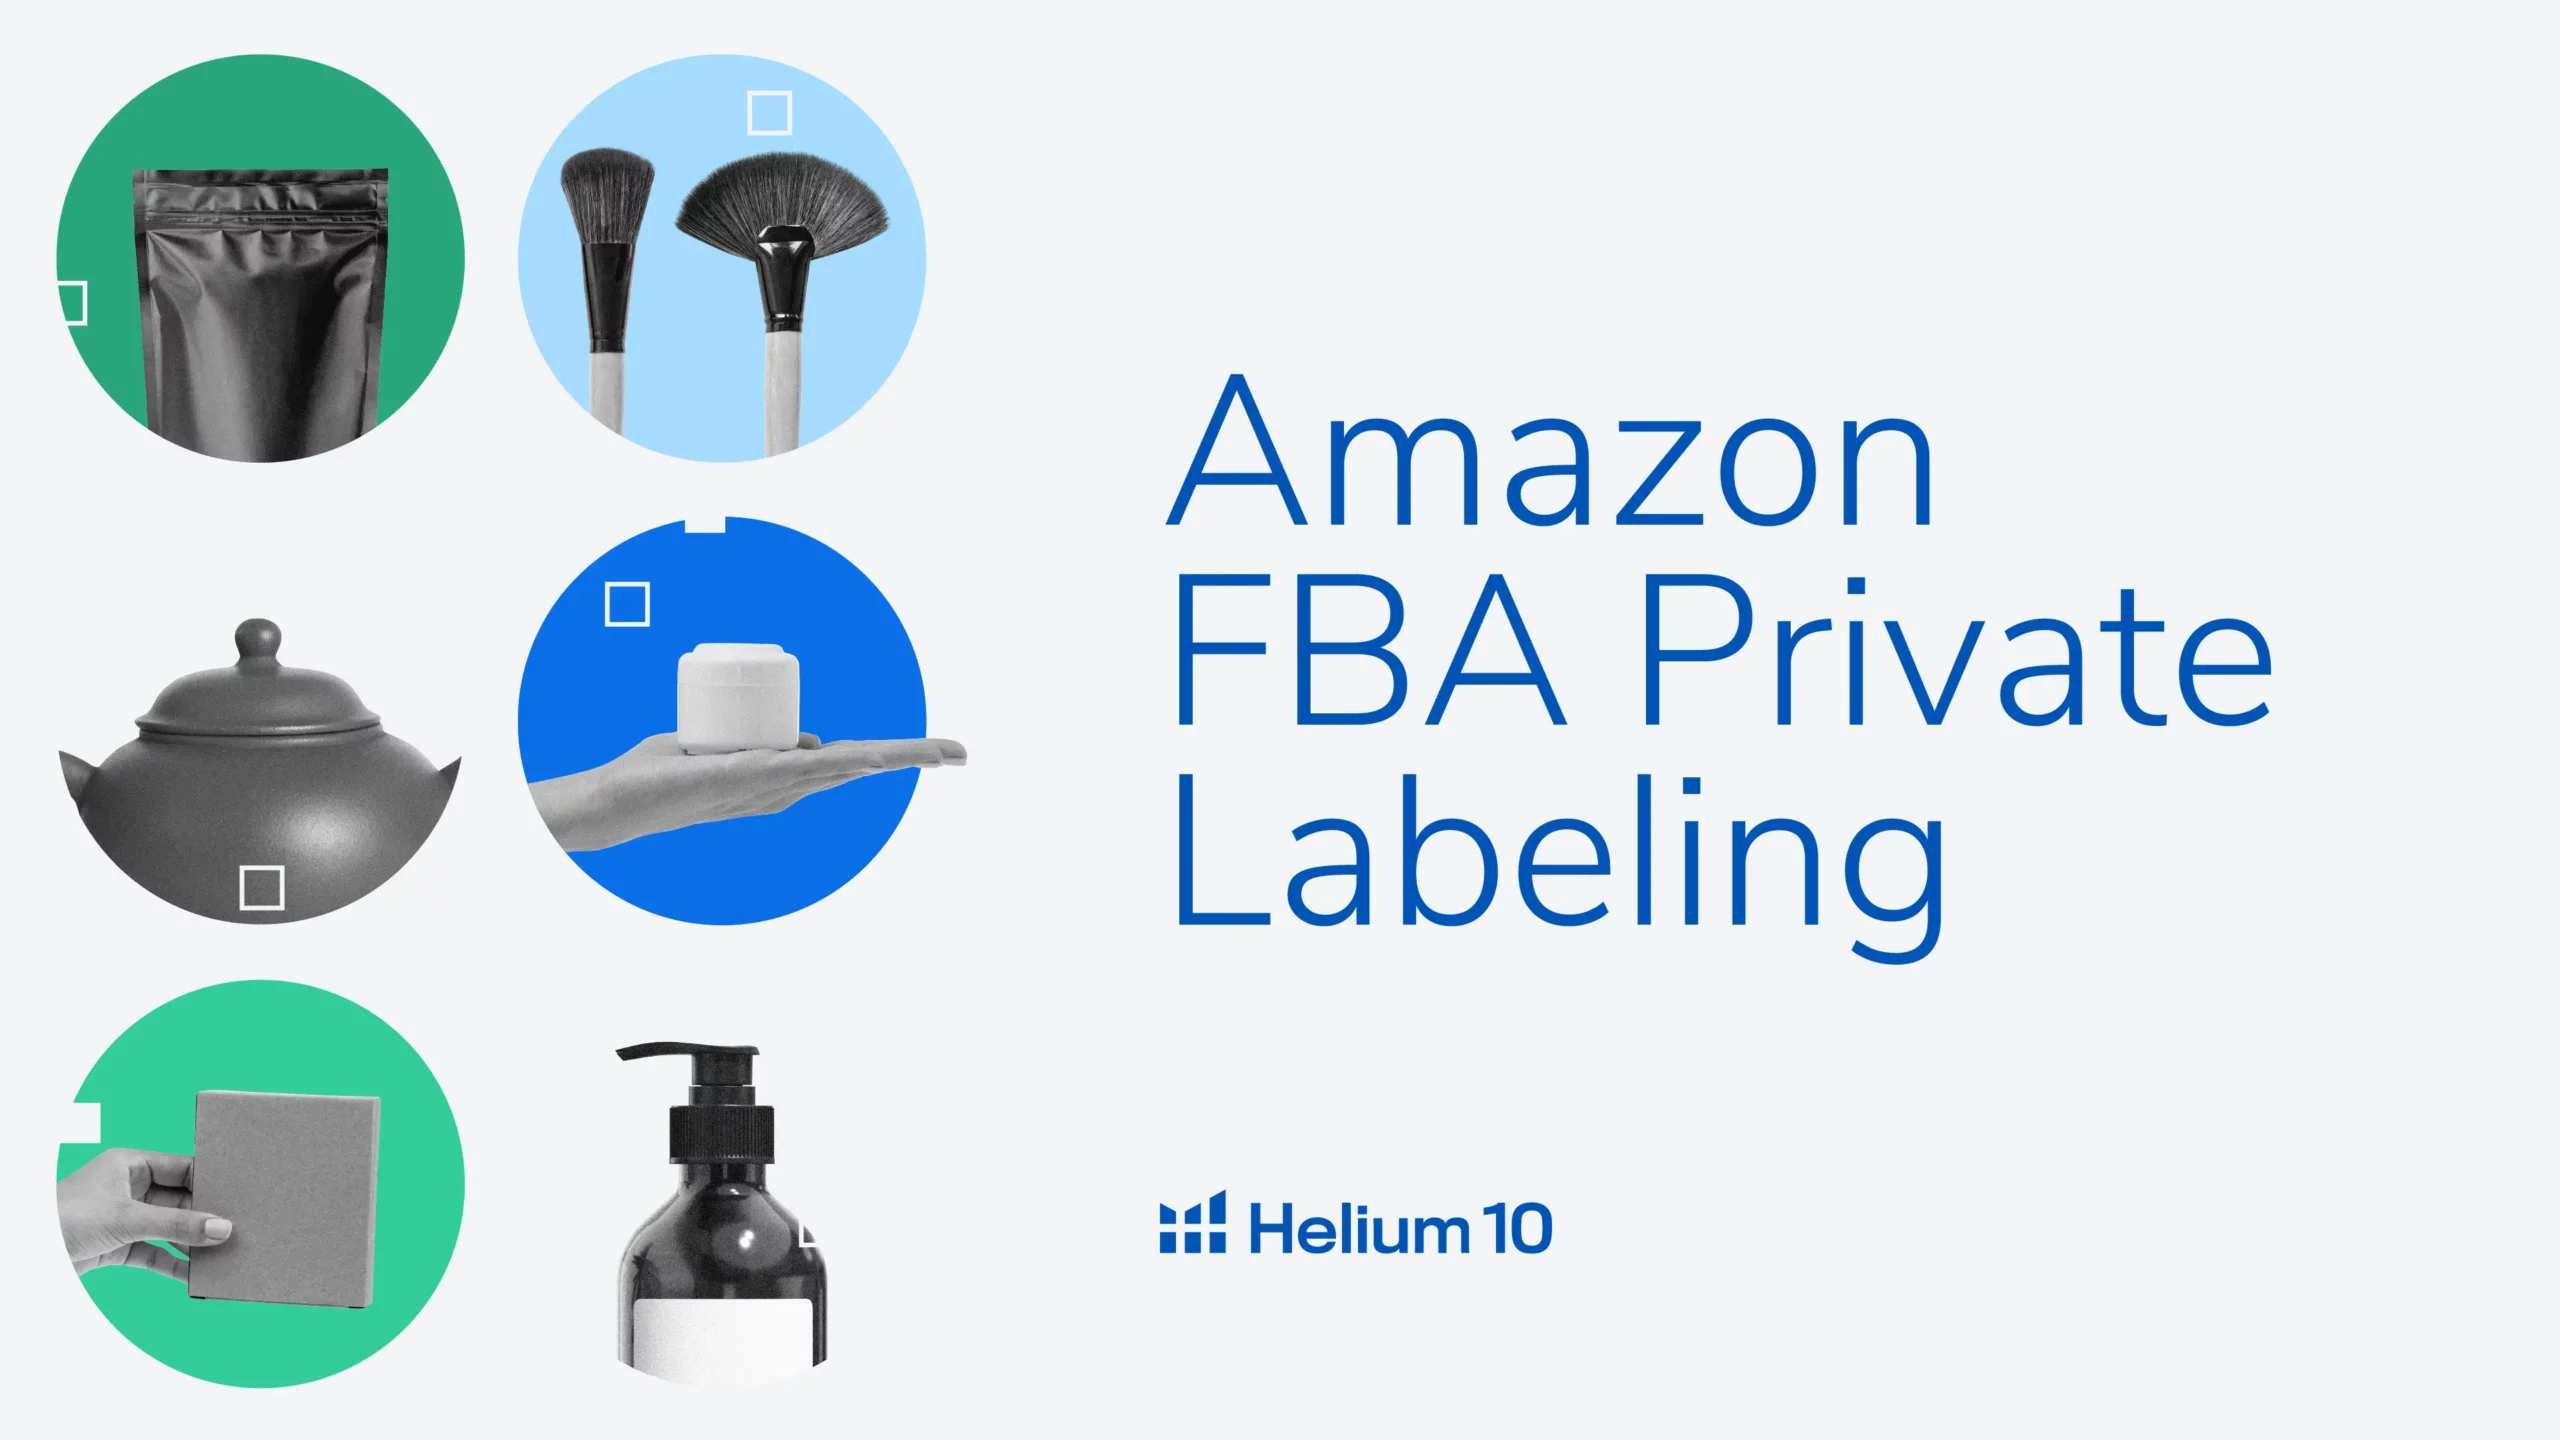 Amazon FBA Private Labeling: Everything You Need to Know